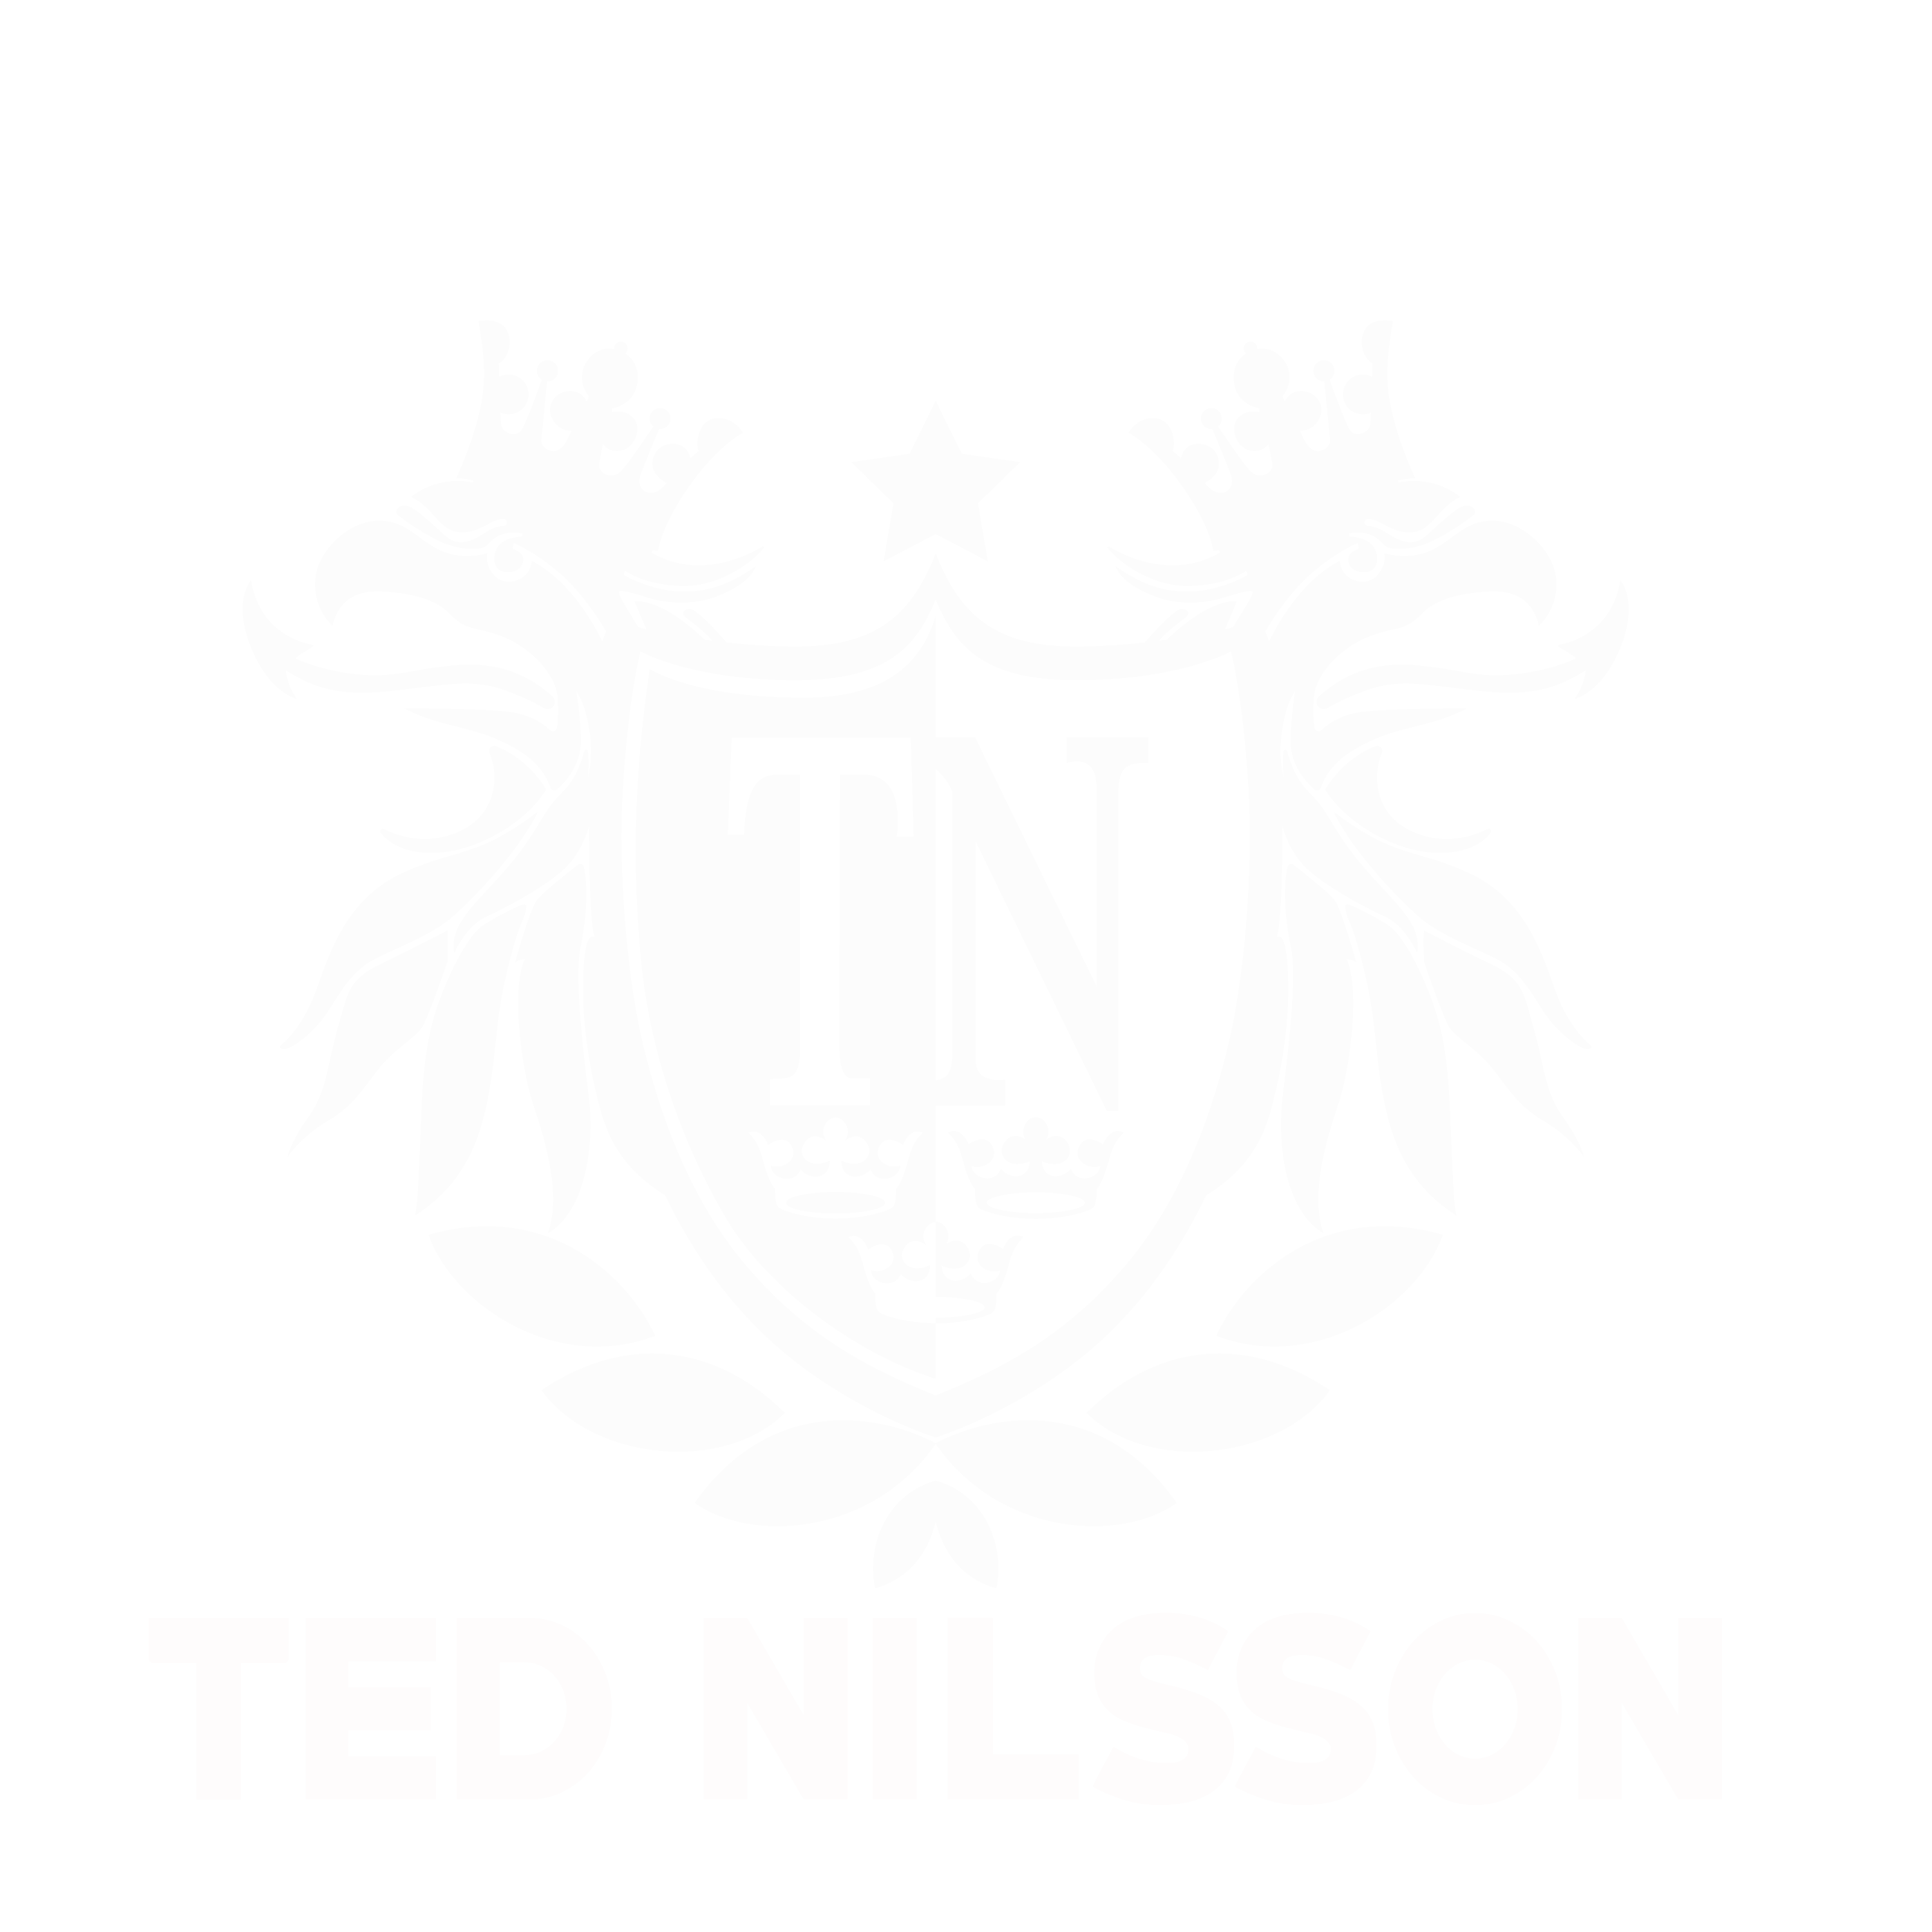 Ted Nilsson